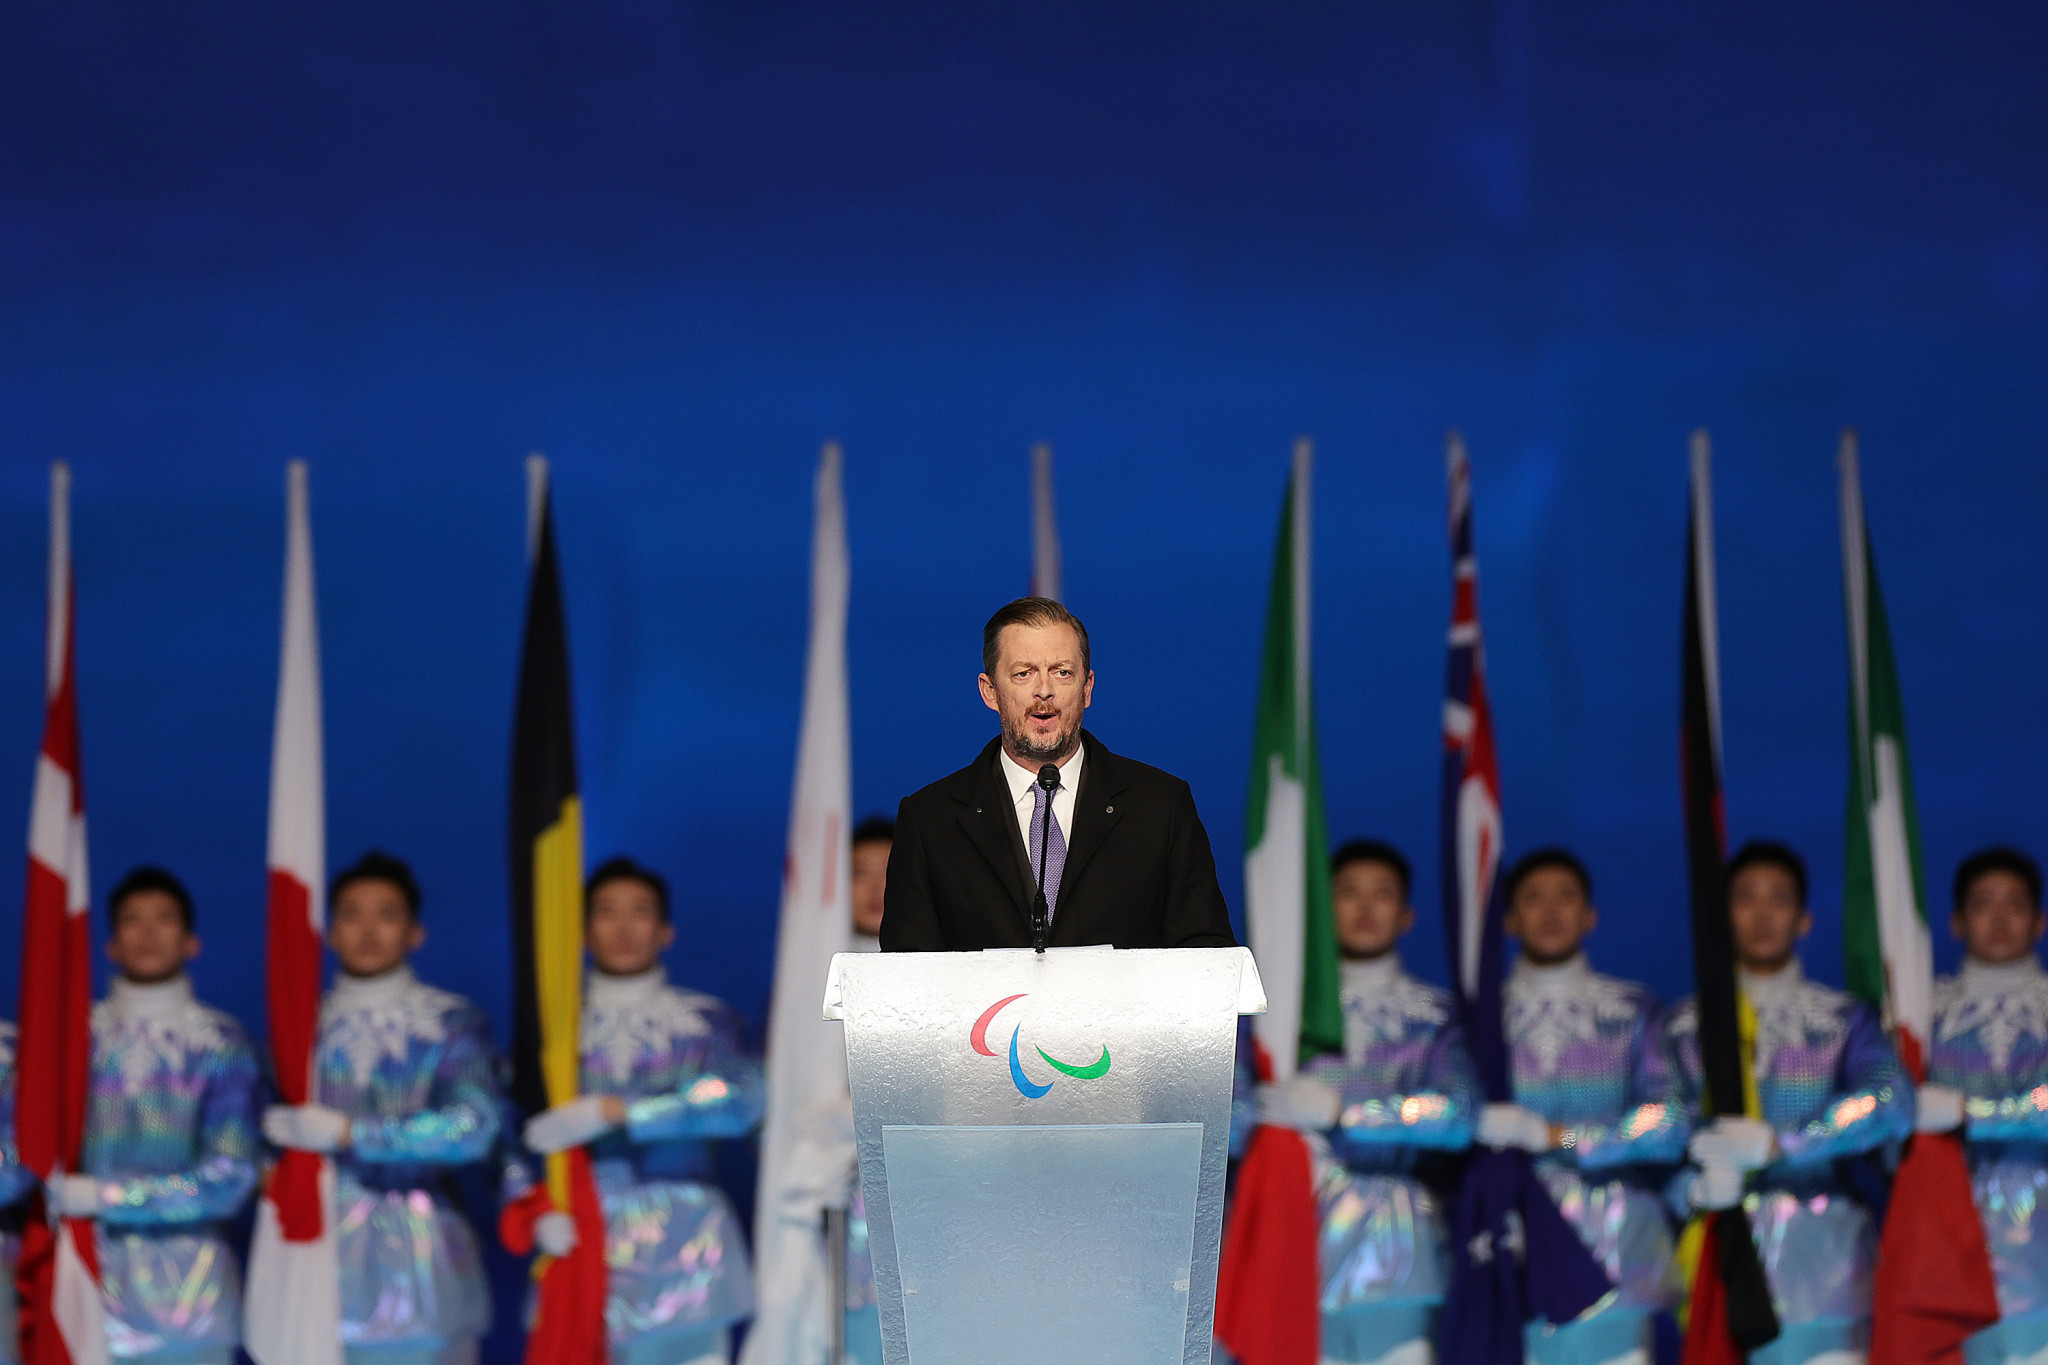 Winter Paralympic Games open with passionate call for peace from IPC President Parsons 